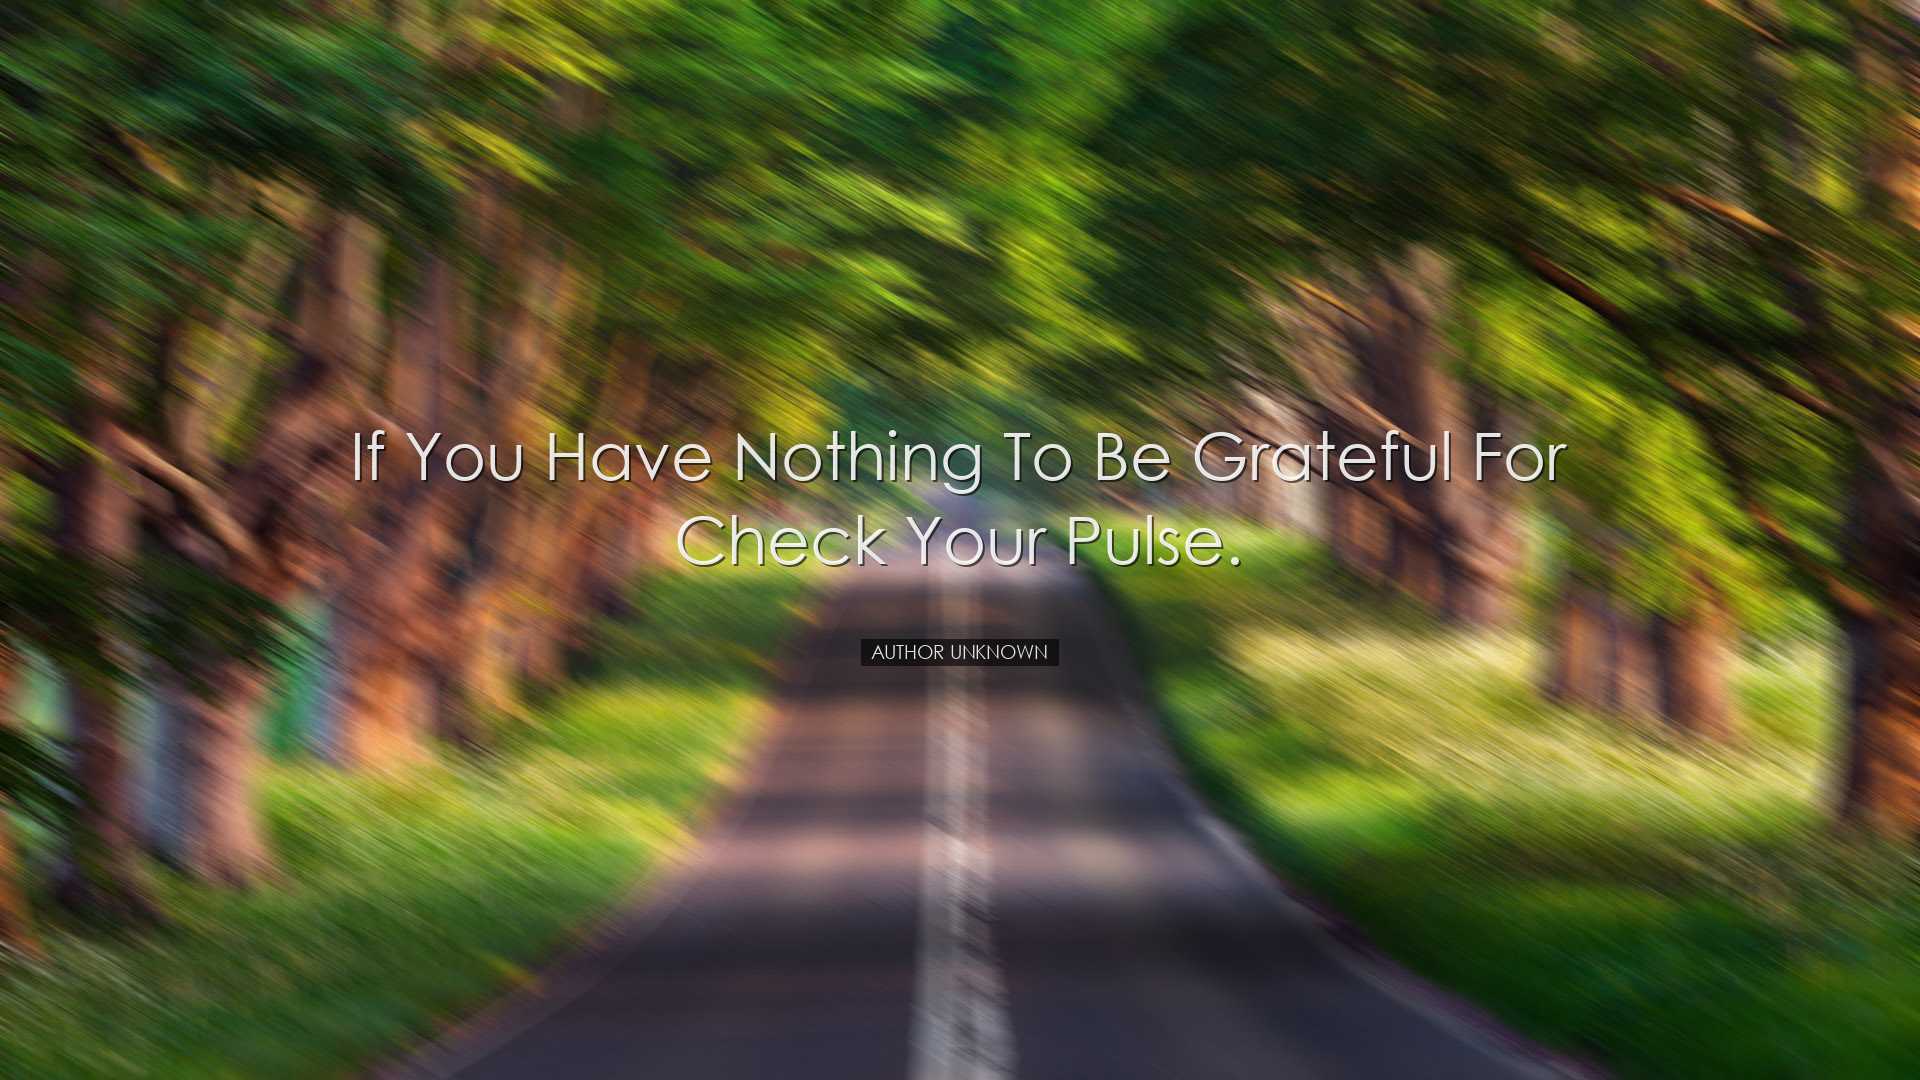 If you have nothing to be grateful for check your pulse. - Author